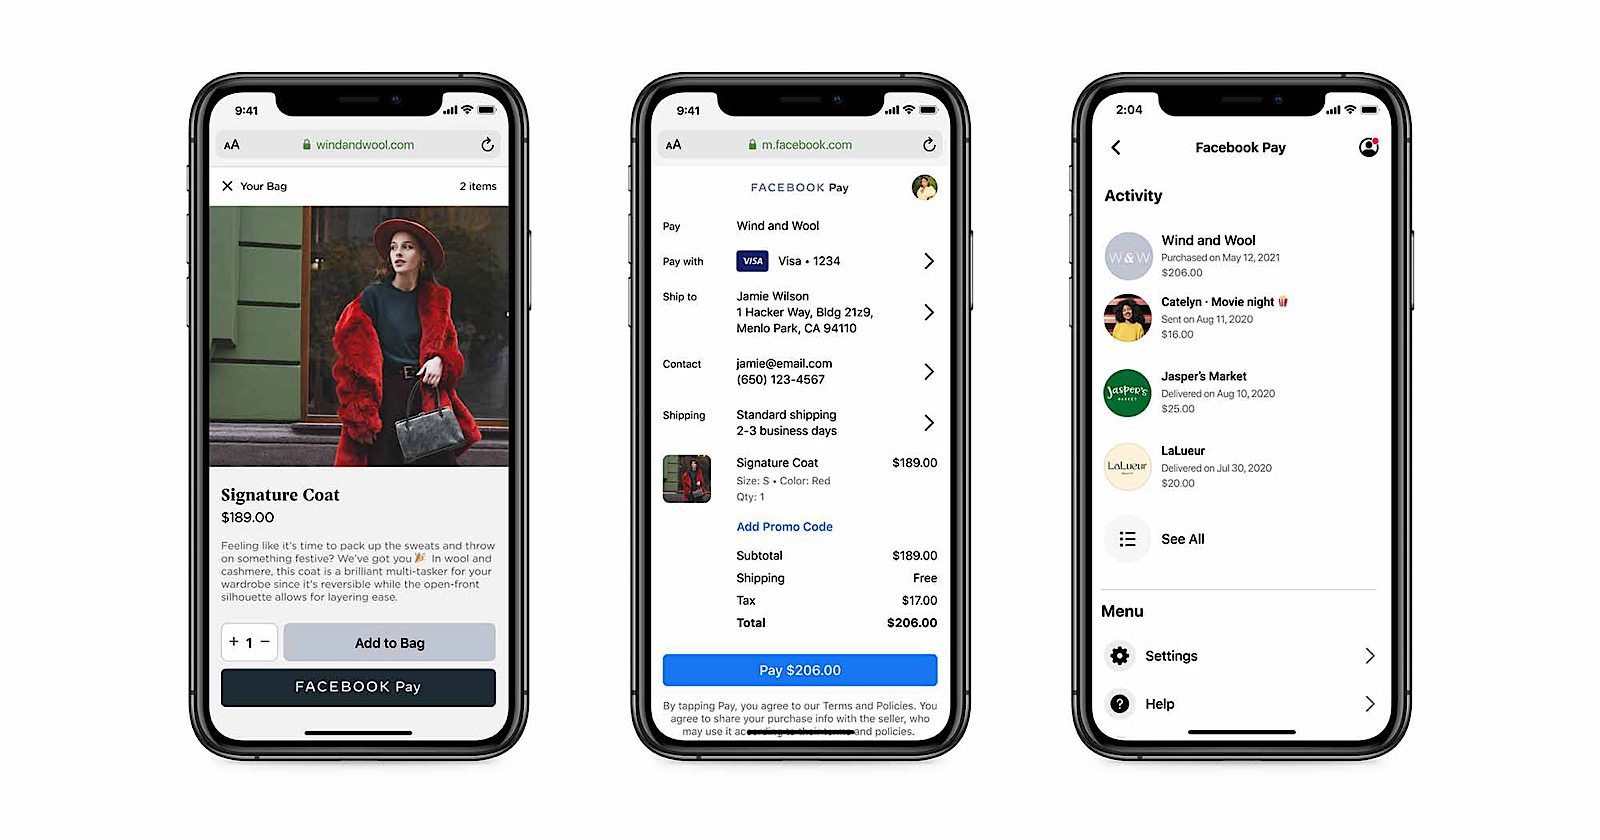 Facebook Pay Rolling Bent On Shopify Sites In August Using , @MattGSouthern thumbnail